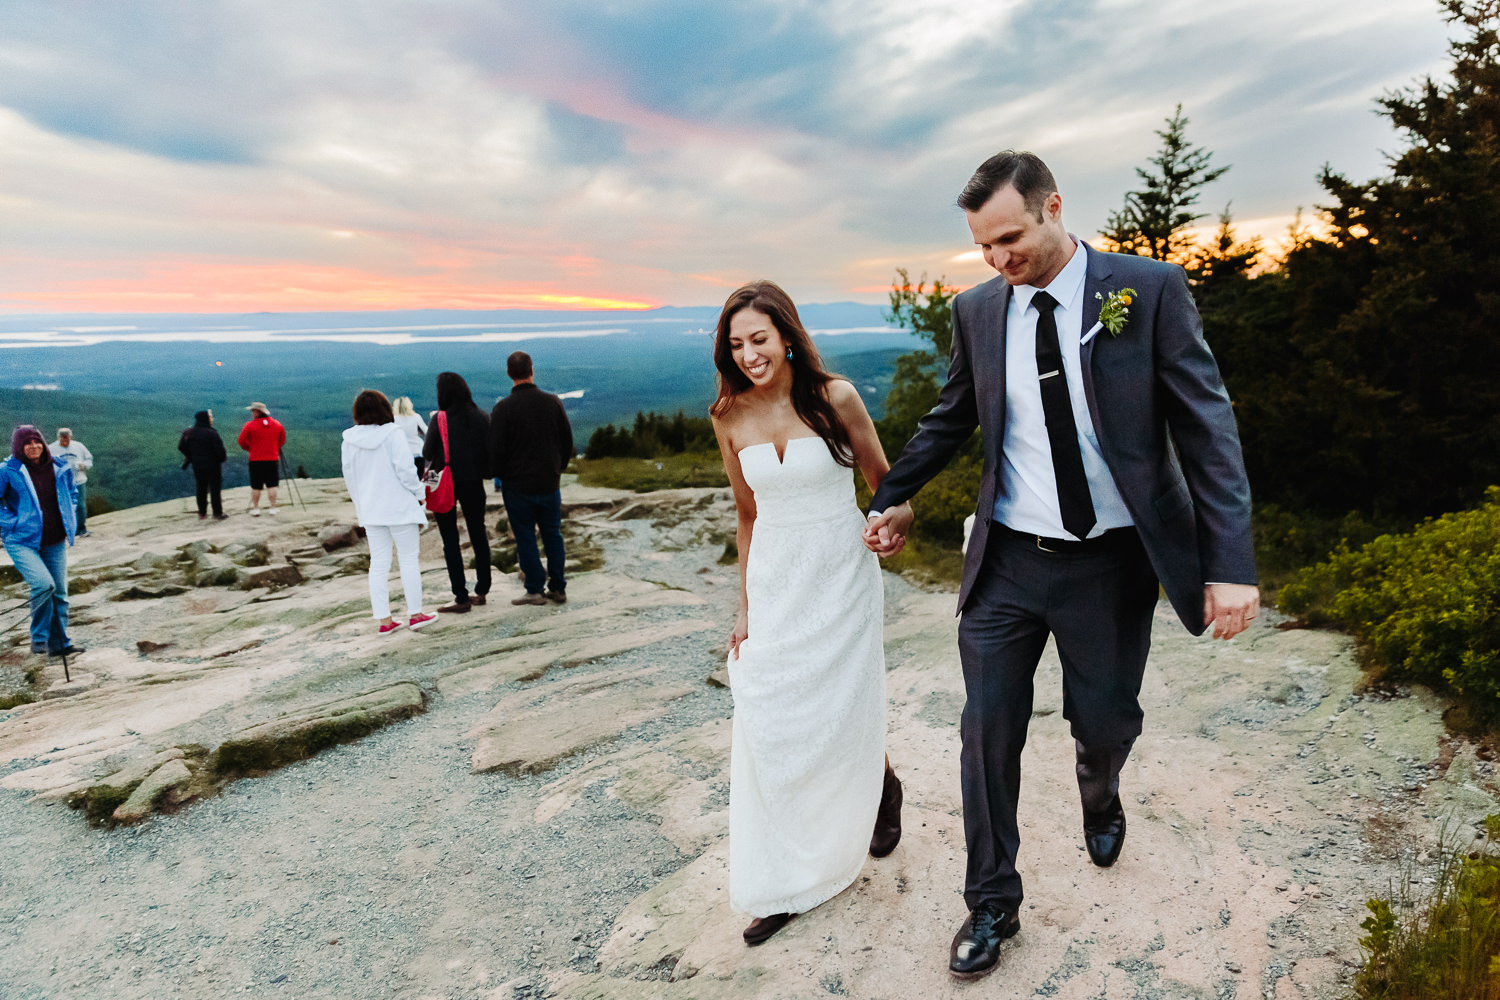 Bride and groom leaving Cadillac Mountain together on their wedding day.